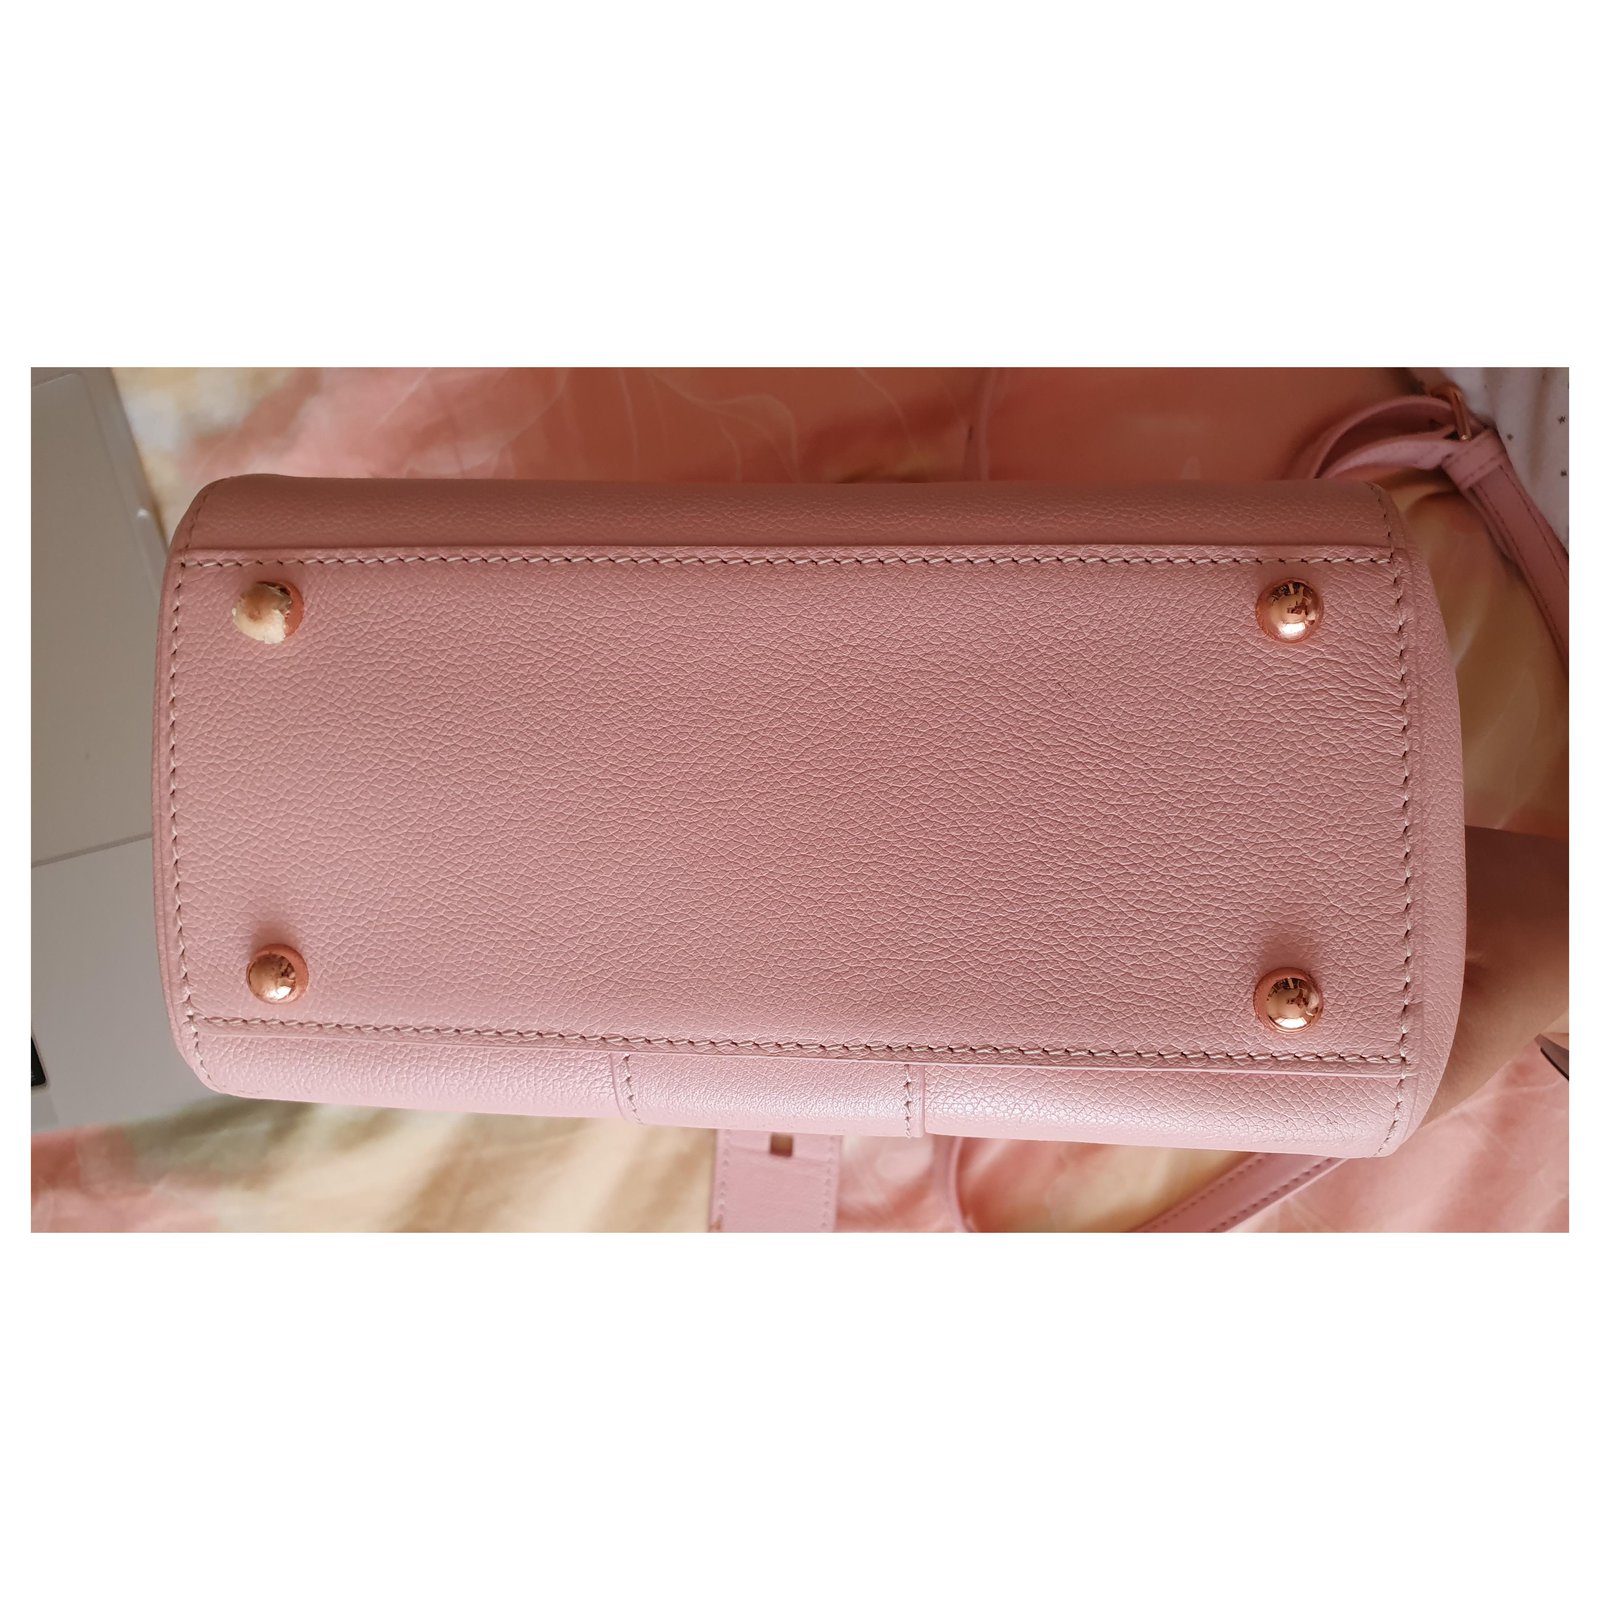 Brillant leather mini bag Delvaux Pink in Leather - 32036705